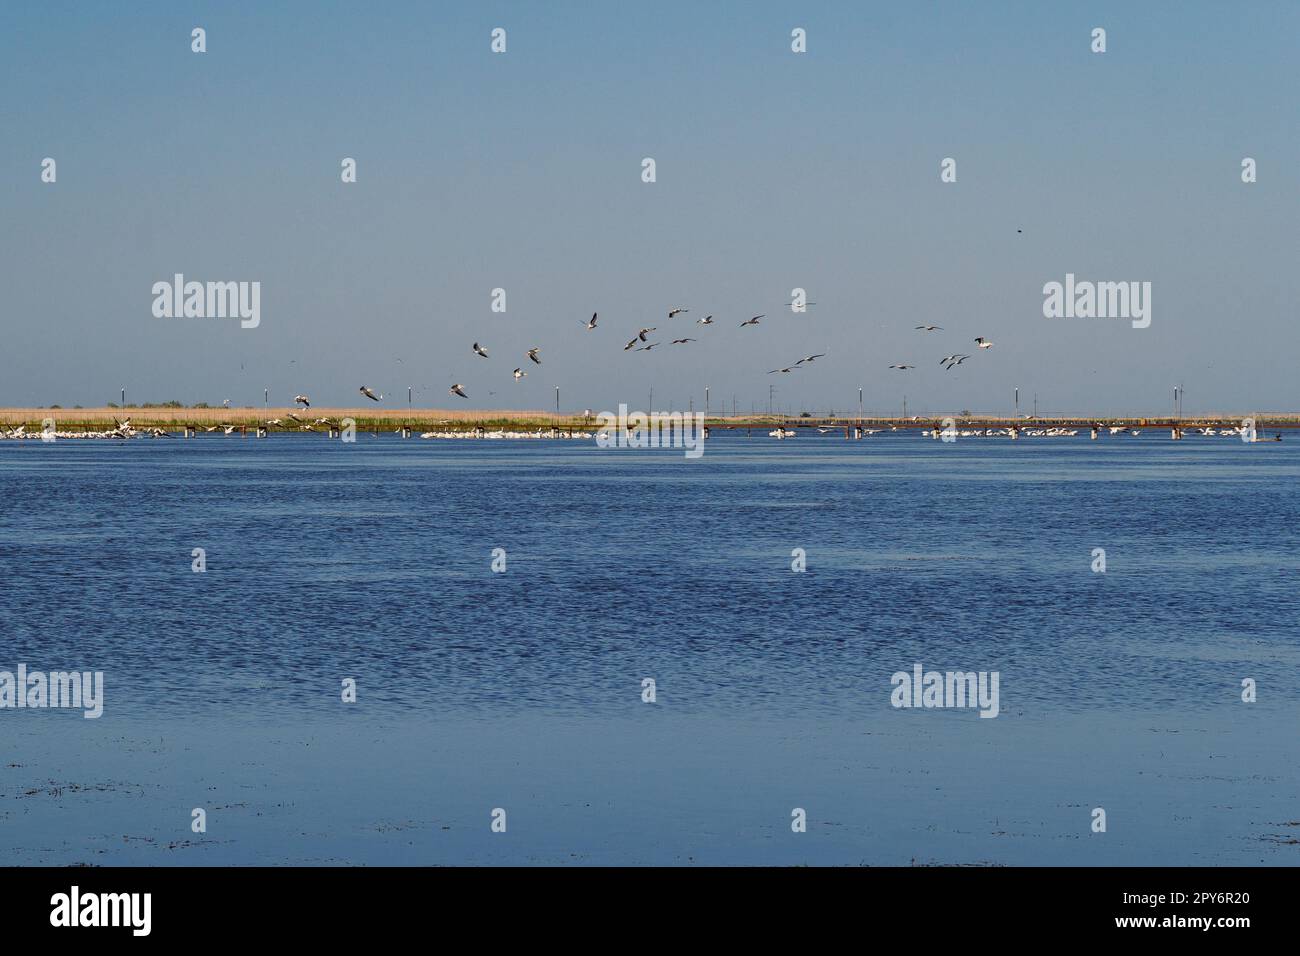 Pelicans flushed from lake landscape photo Stock Photo